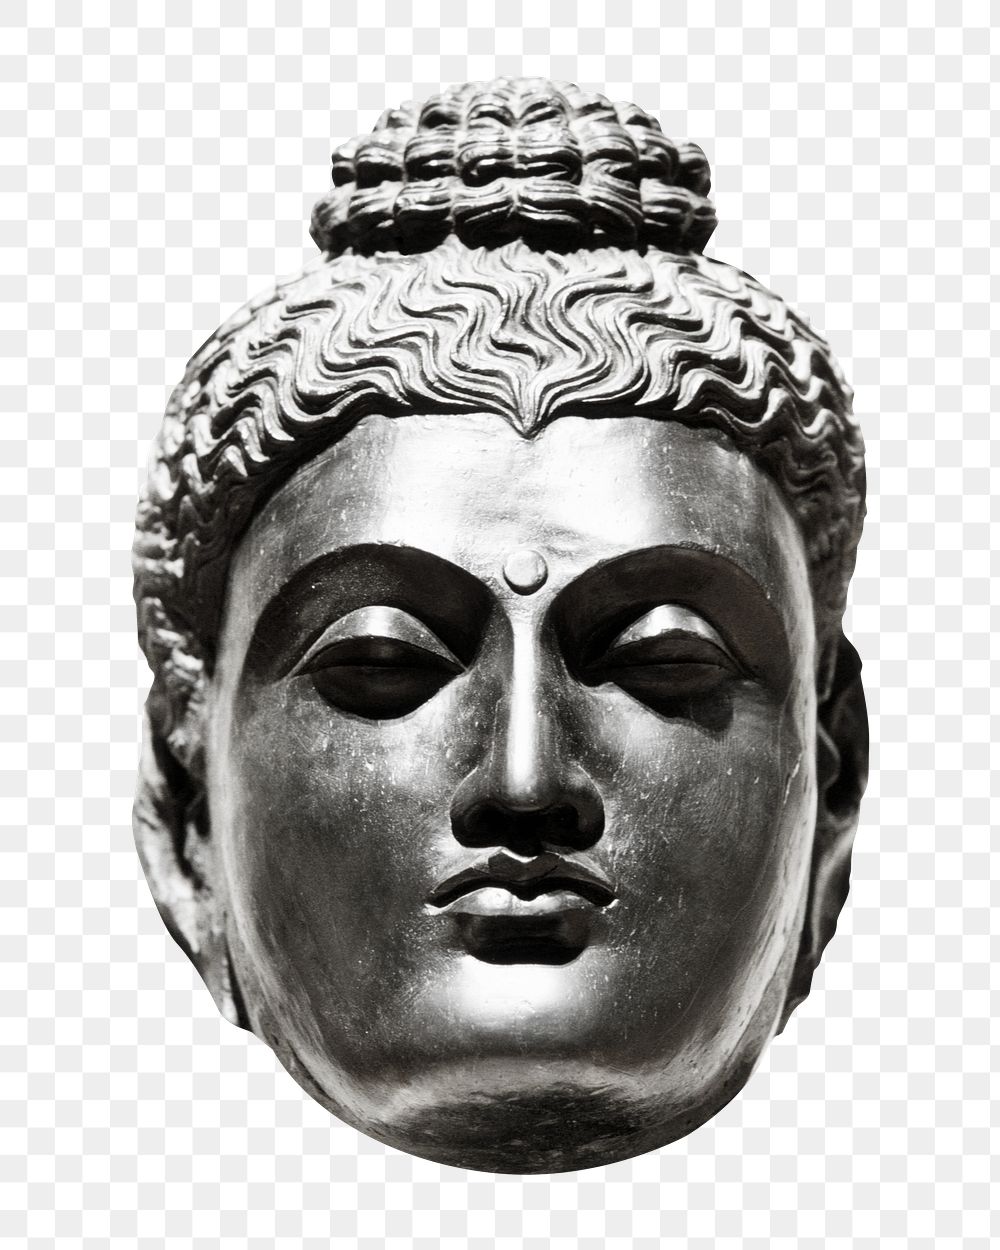 Indian Buddha head png religious sticker, transparent background